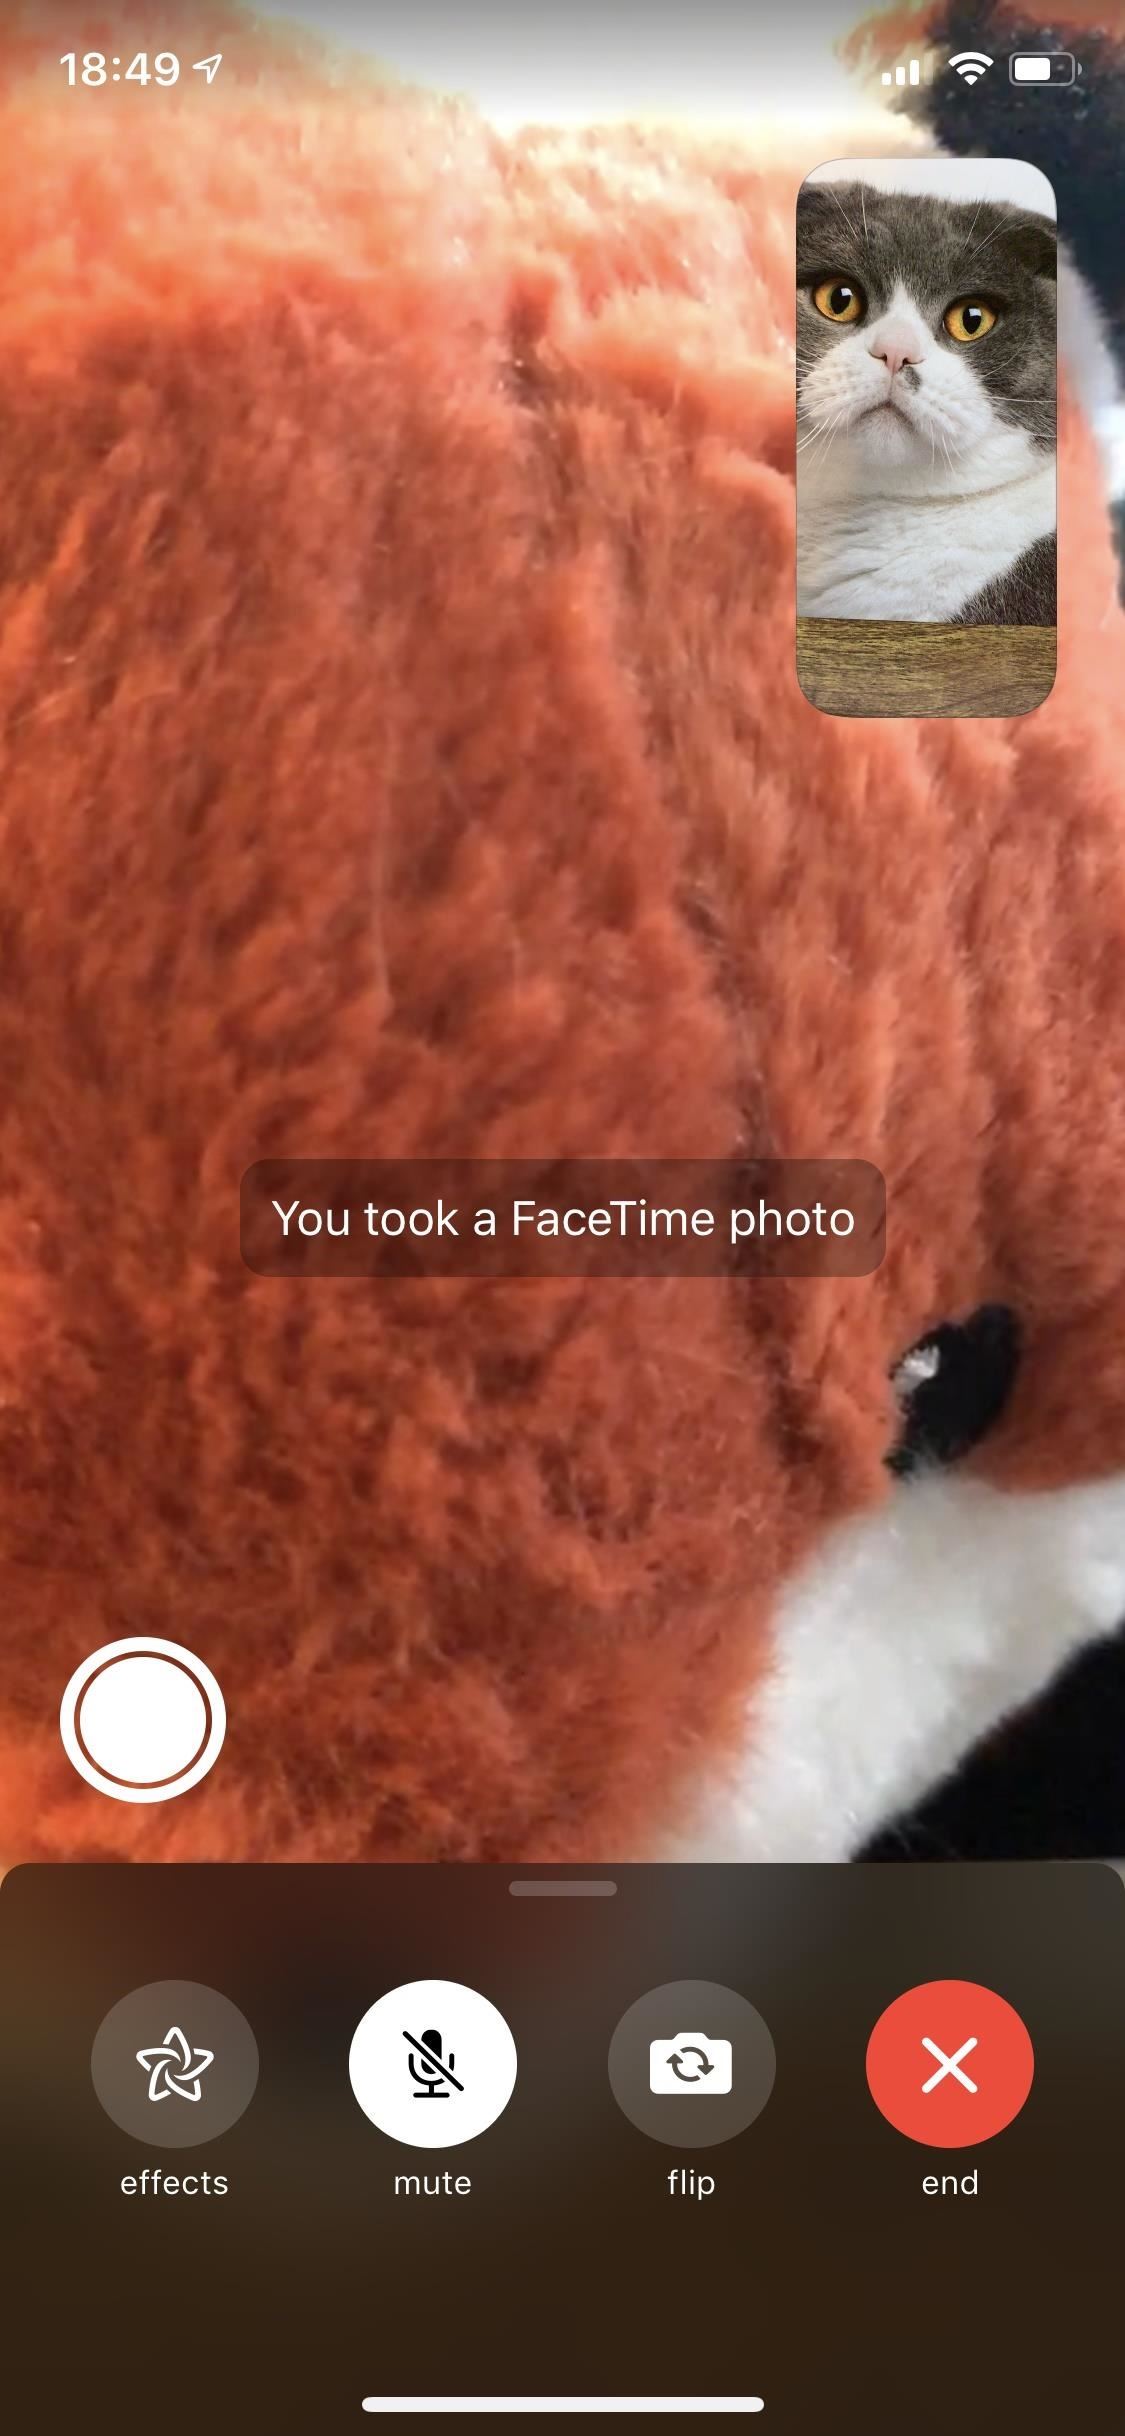 11 Tips for FaceTime Chatting with Friends & Family from Your iPhone